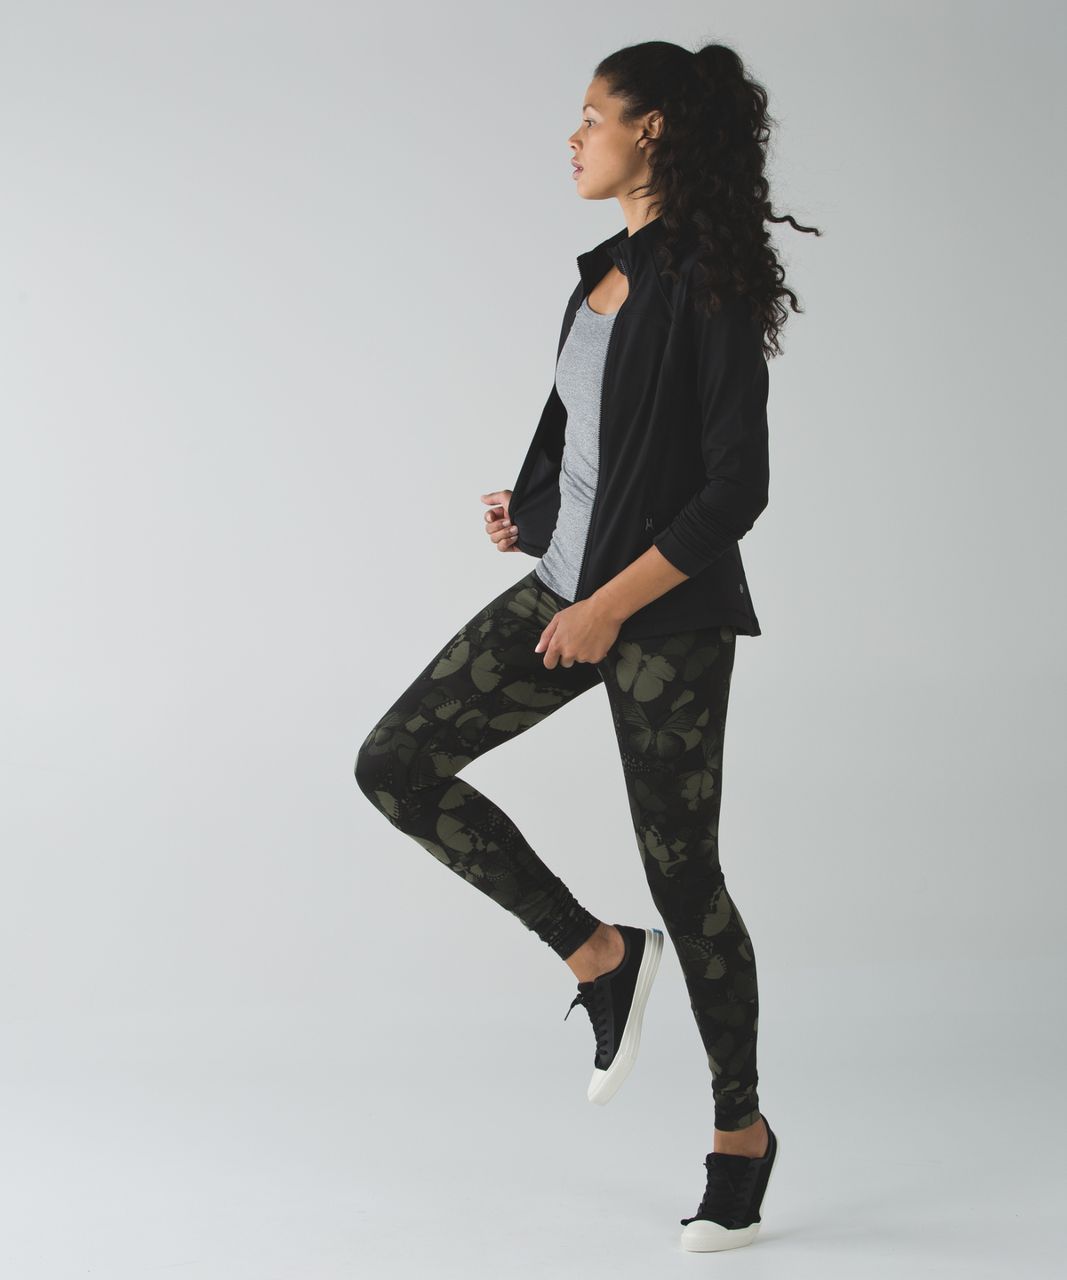 Lululemon Wunder Under Pant *Full-On Luon (Hi-Rise) - Biggie So Fly Butterfly Fatigue Green Black